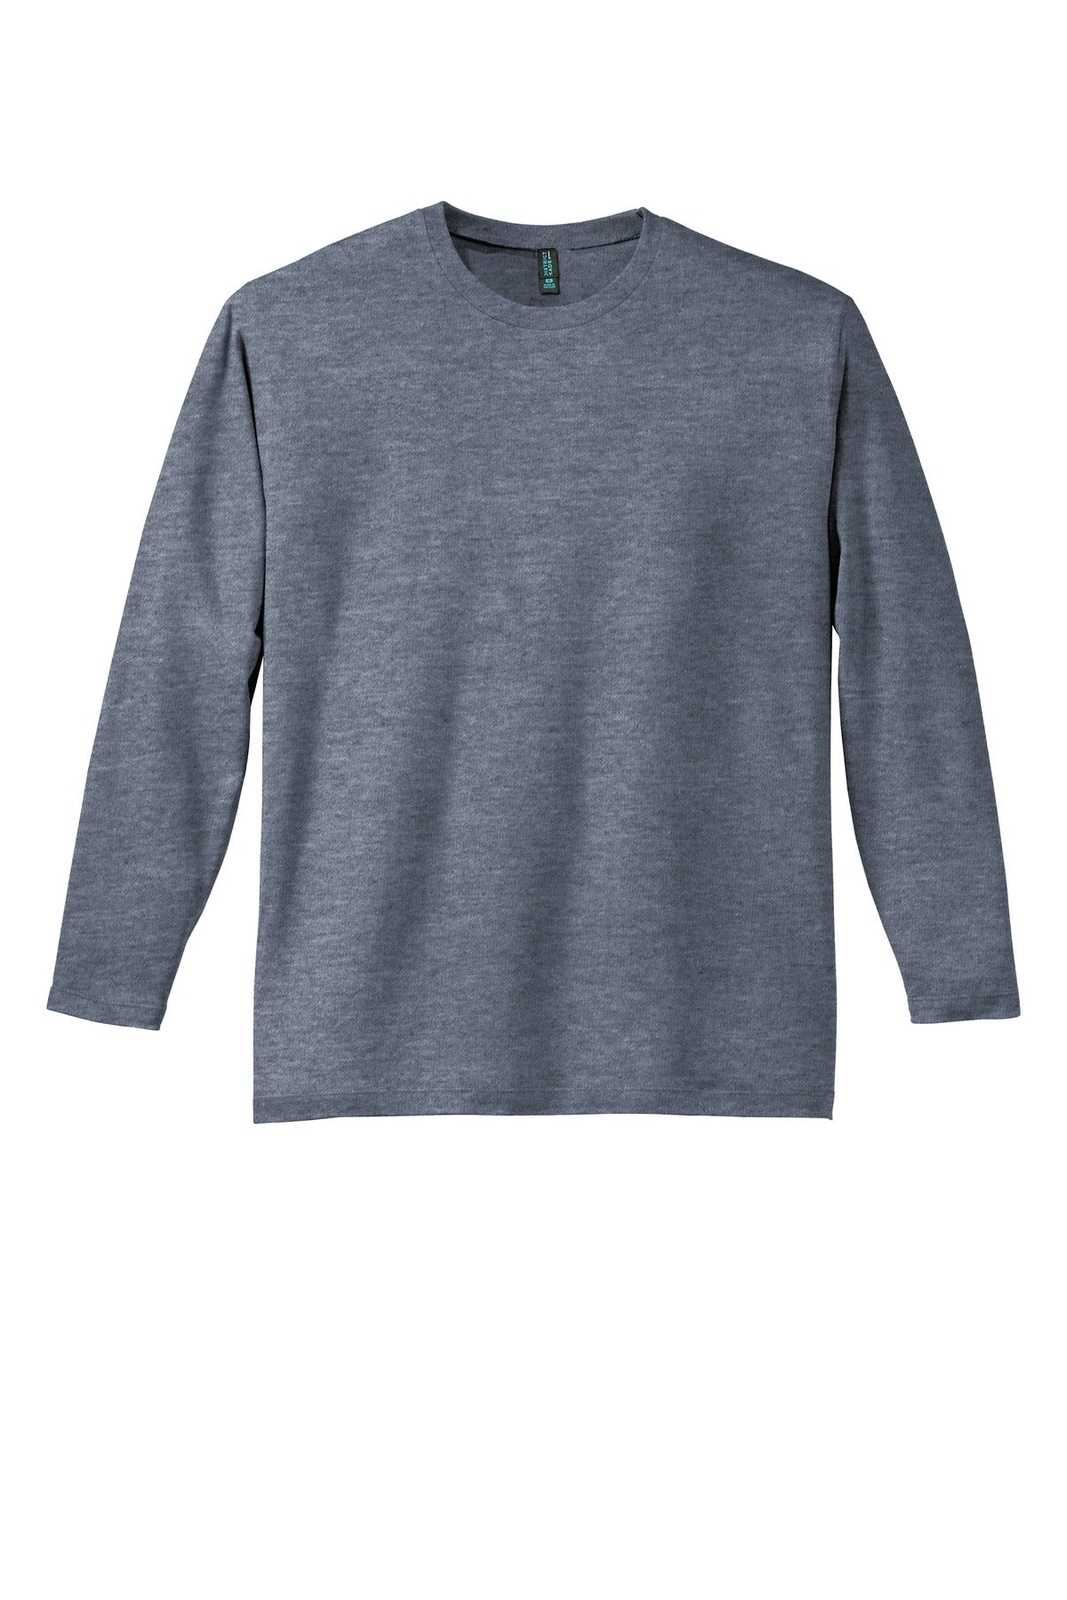 District DT105 Perfect Weight Long Sleeve Tee - Heathered Navy - HIT a Double - 5